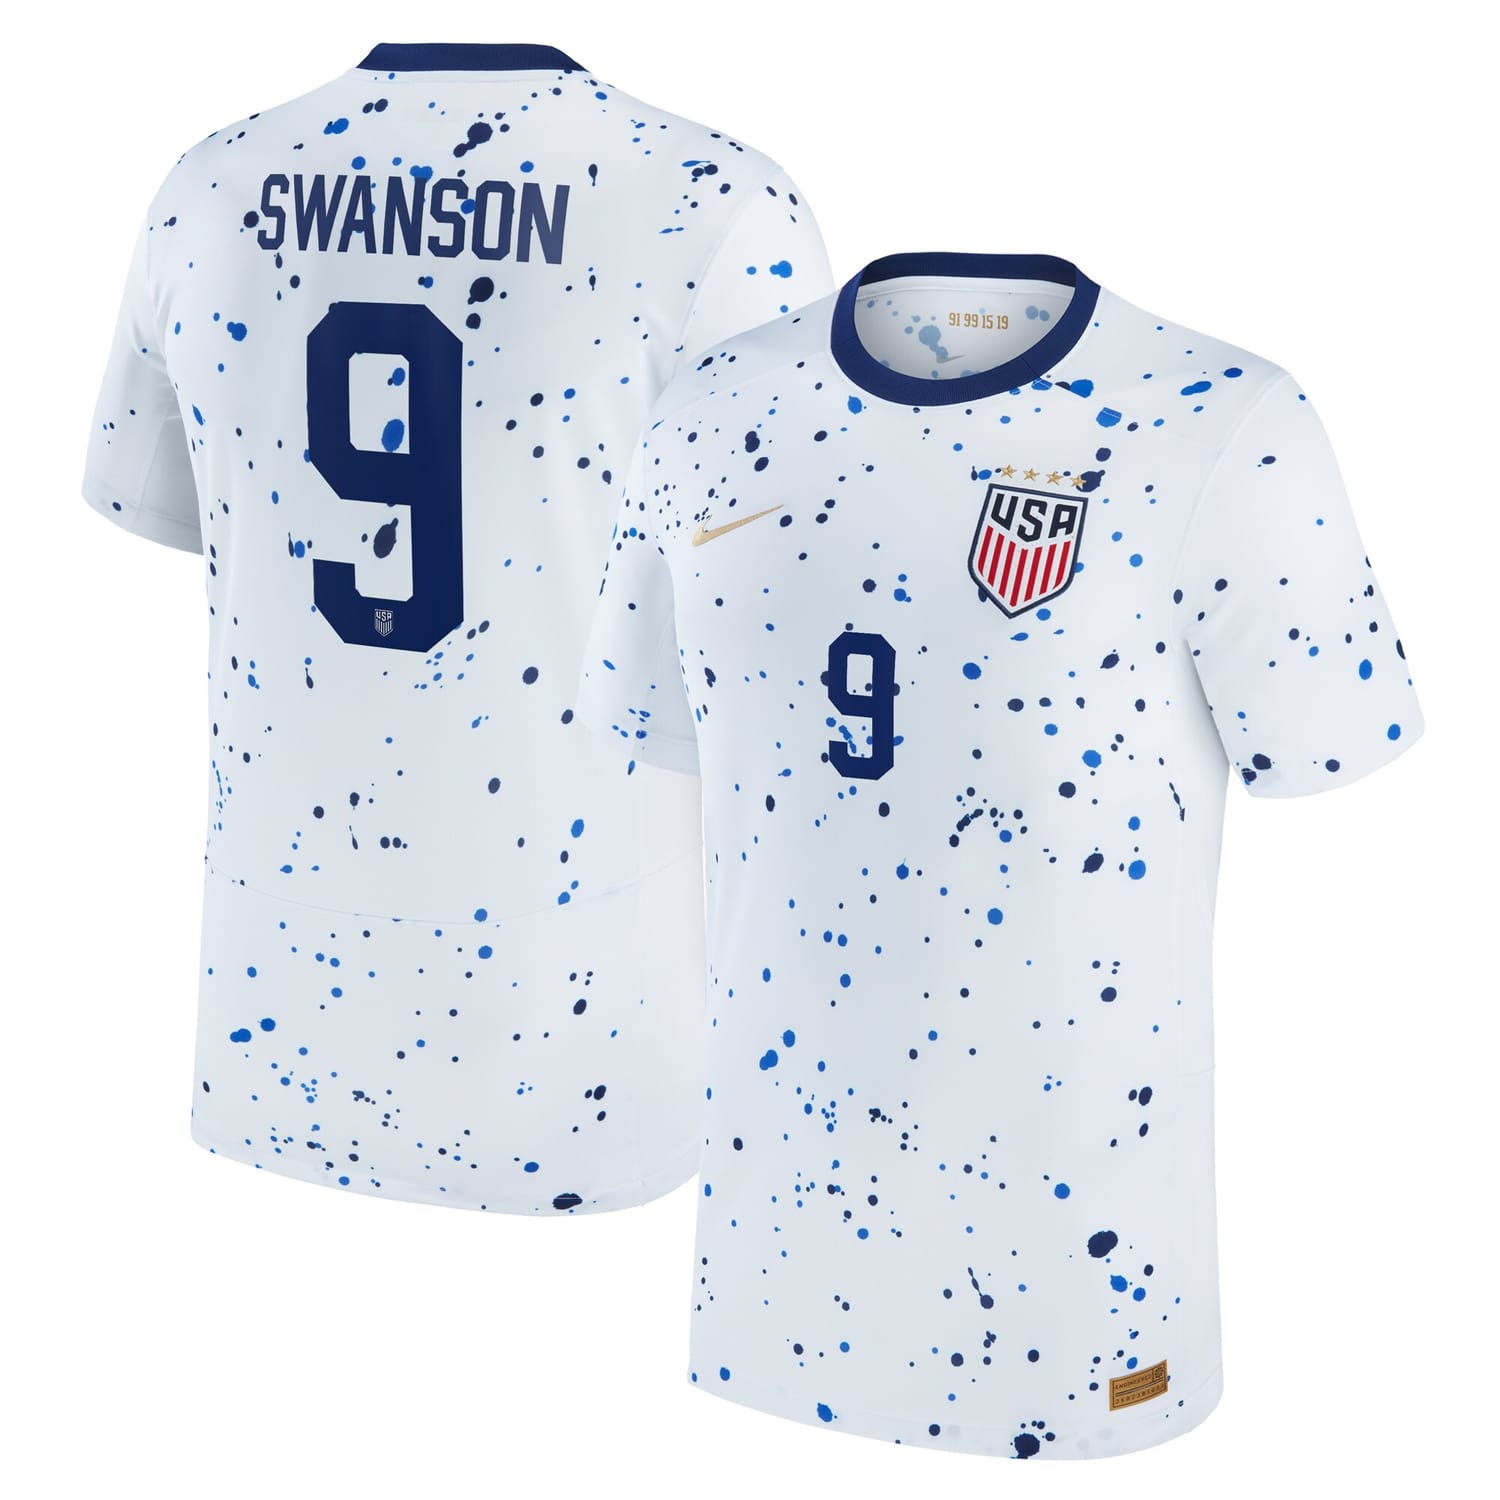 USWNT Home Jersey Shirt White 2023 player Mallory Swanson printing for Men